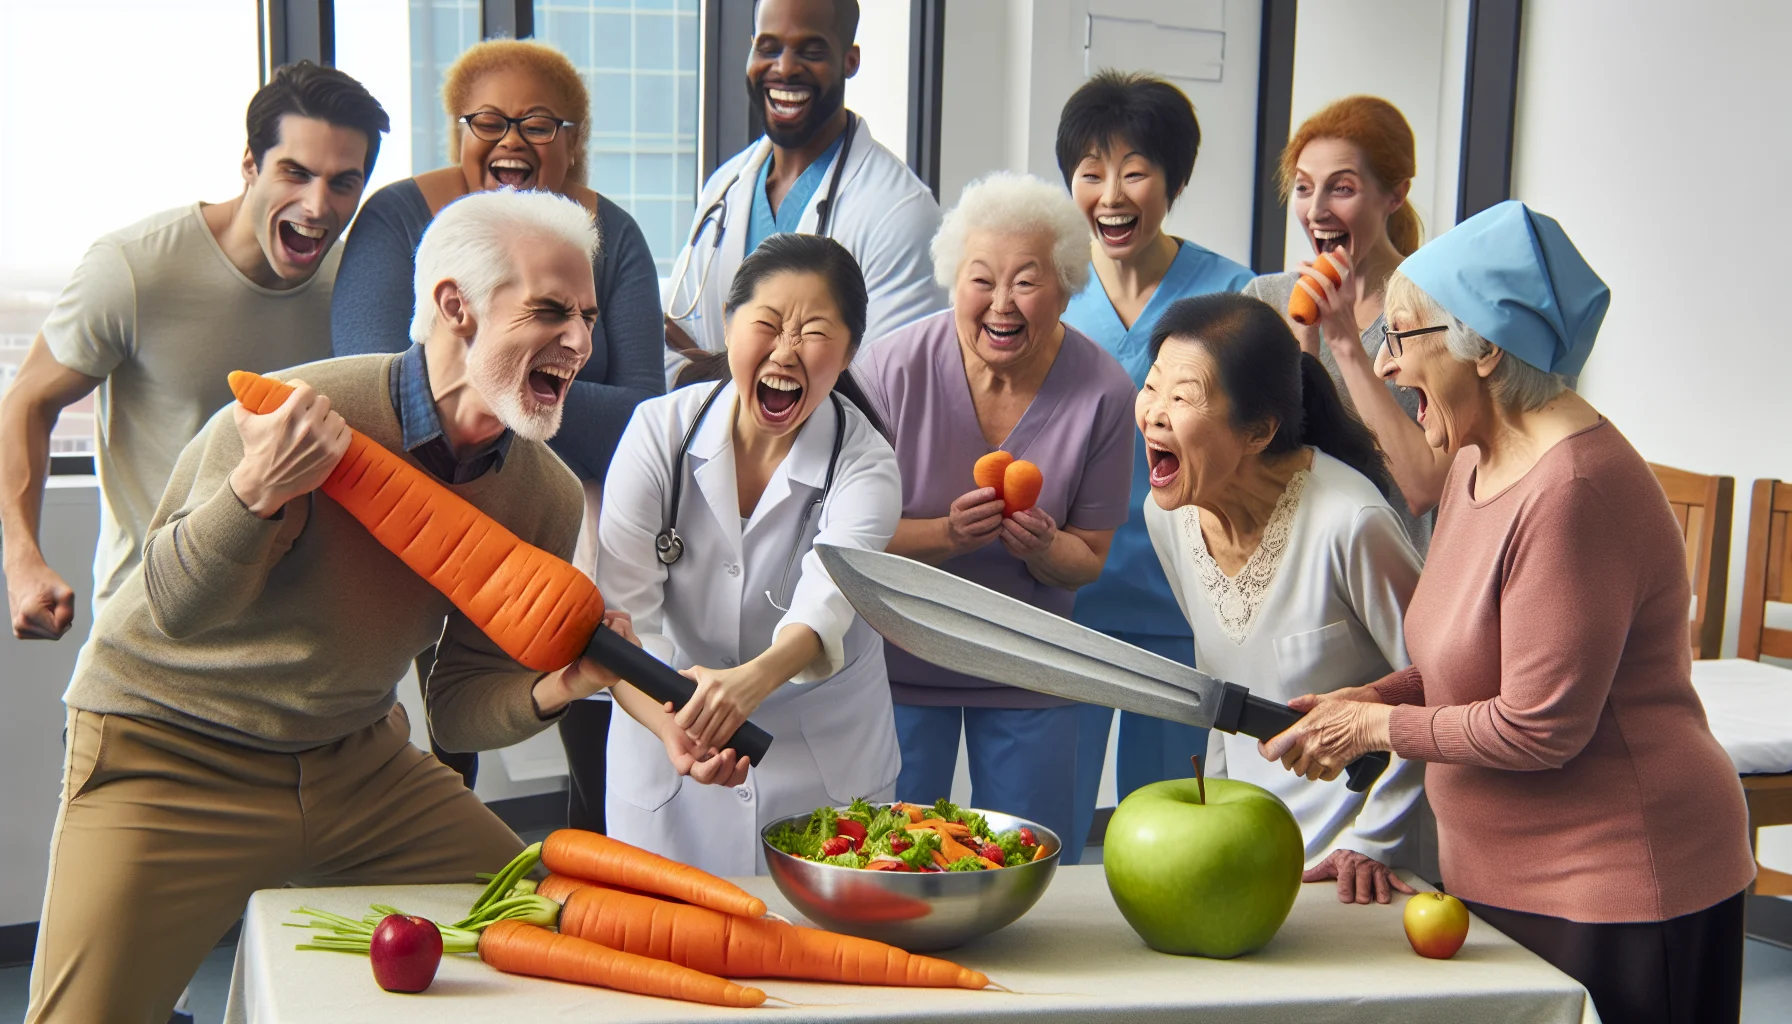 Generate a humorous yet realistic image featuring a lively scene at a medical center specialized in healthy aging. Envision a diverse group of elated elderly people. An Asian man is engaged in a playful 'carrot sword' duel with a Hispanic woman, both holding giant, crisp carrots. They are surrounded by amused peers; a Middle Eastern lady savoring a bowl of vibrant, crunchy salads and a Caucasian gentleman guffawing boisterously while putting a large, shiny apple to his mouth, mimicking a microphone. Staff members, both male and female of varying descents, stand by with delightful expressions on their faces at this spontaneous display of diet-conscious fun.